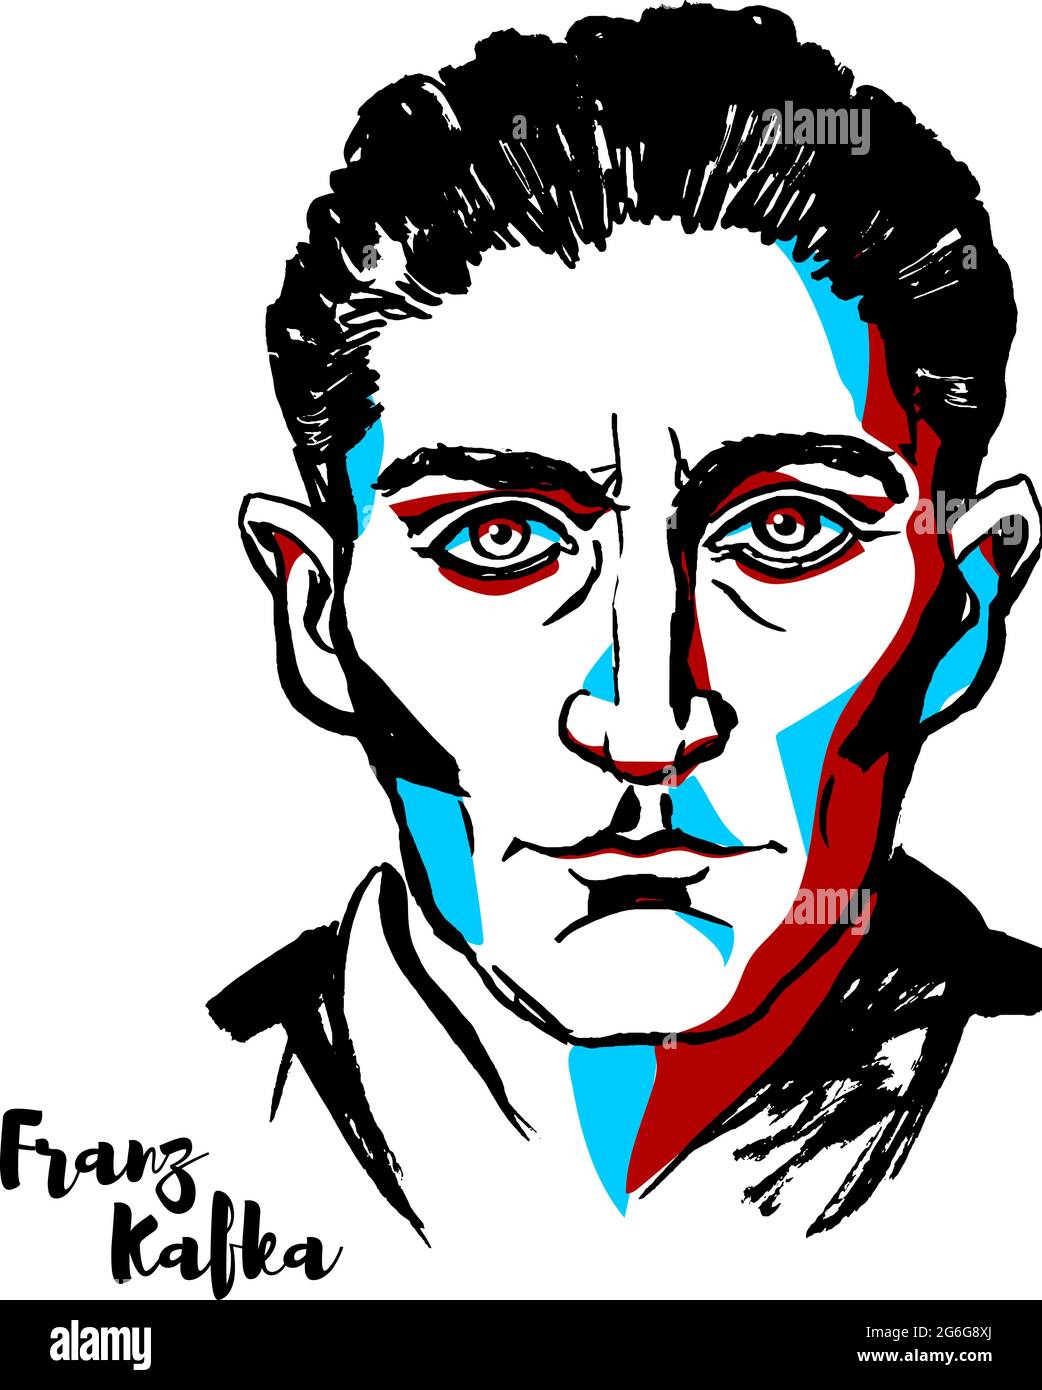 MOSCOW, RUSSIA - AUGUST 21, 2018: Franz Kafka engraved vector portrait with ink contours. German-speaking Bohemian Jewish novelist and short story wri Stock Vector